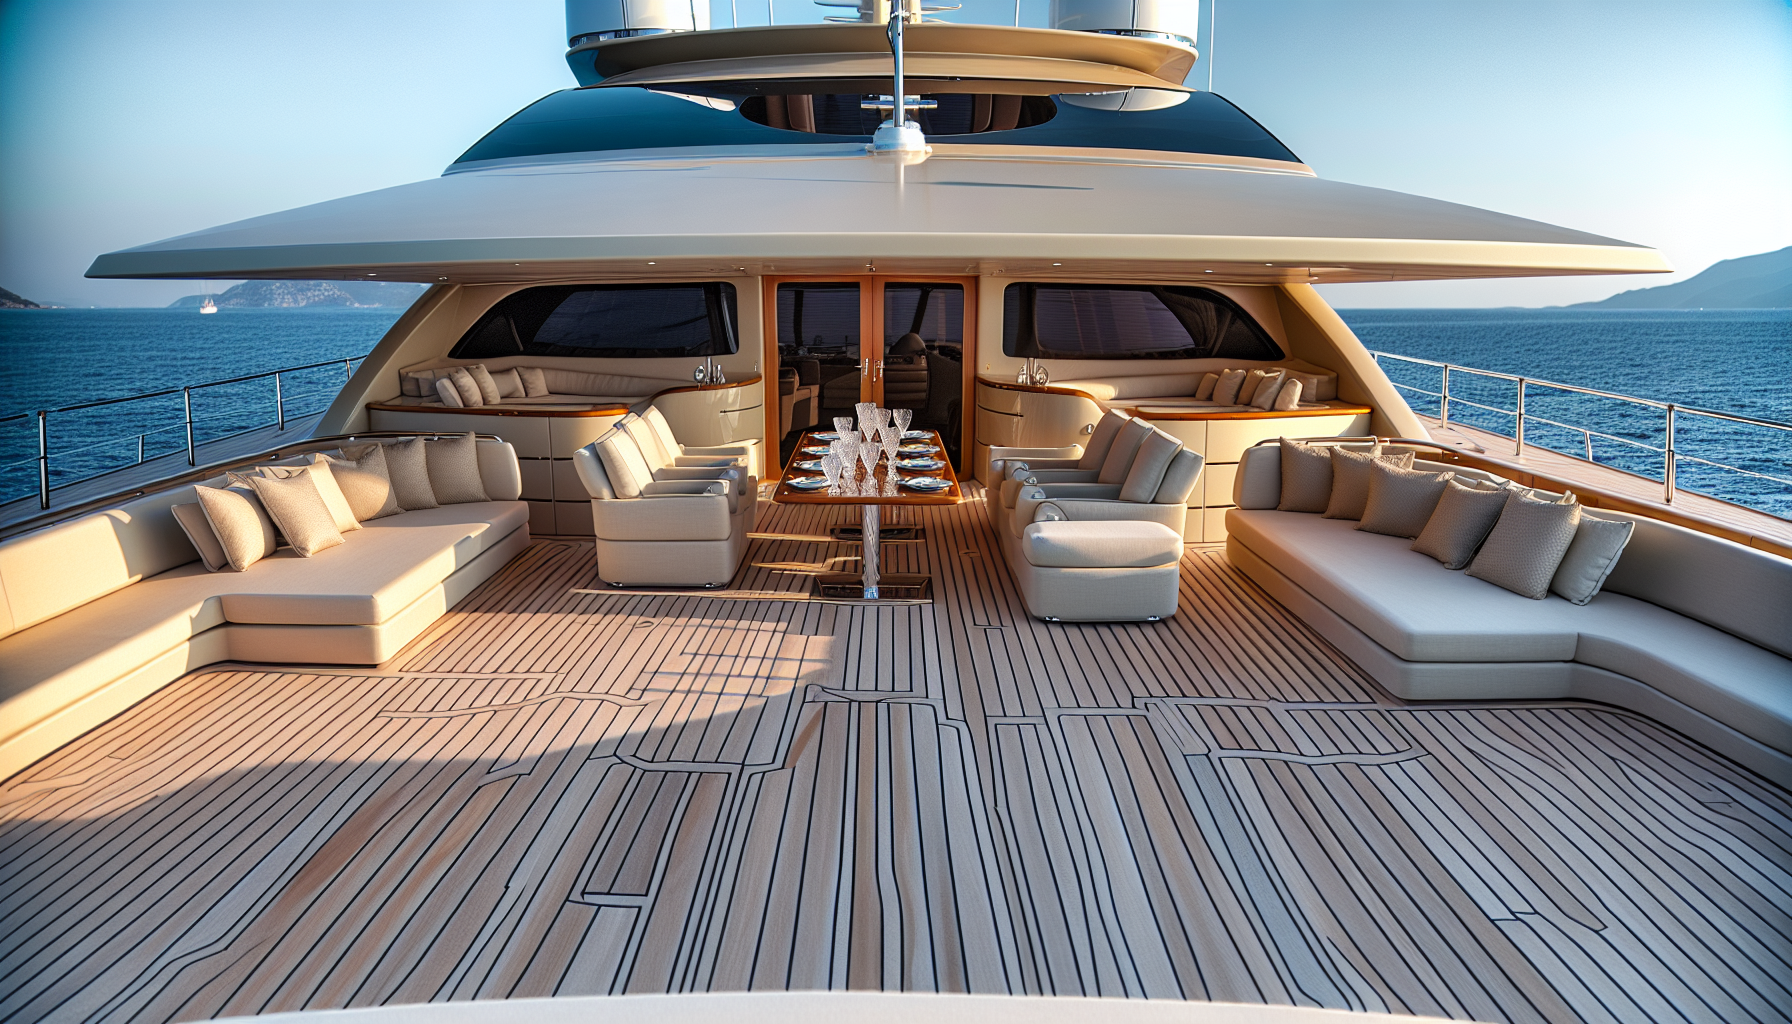 Luxury yacht deck with comfortable seating